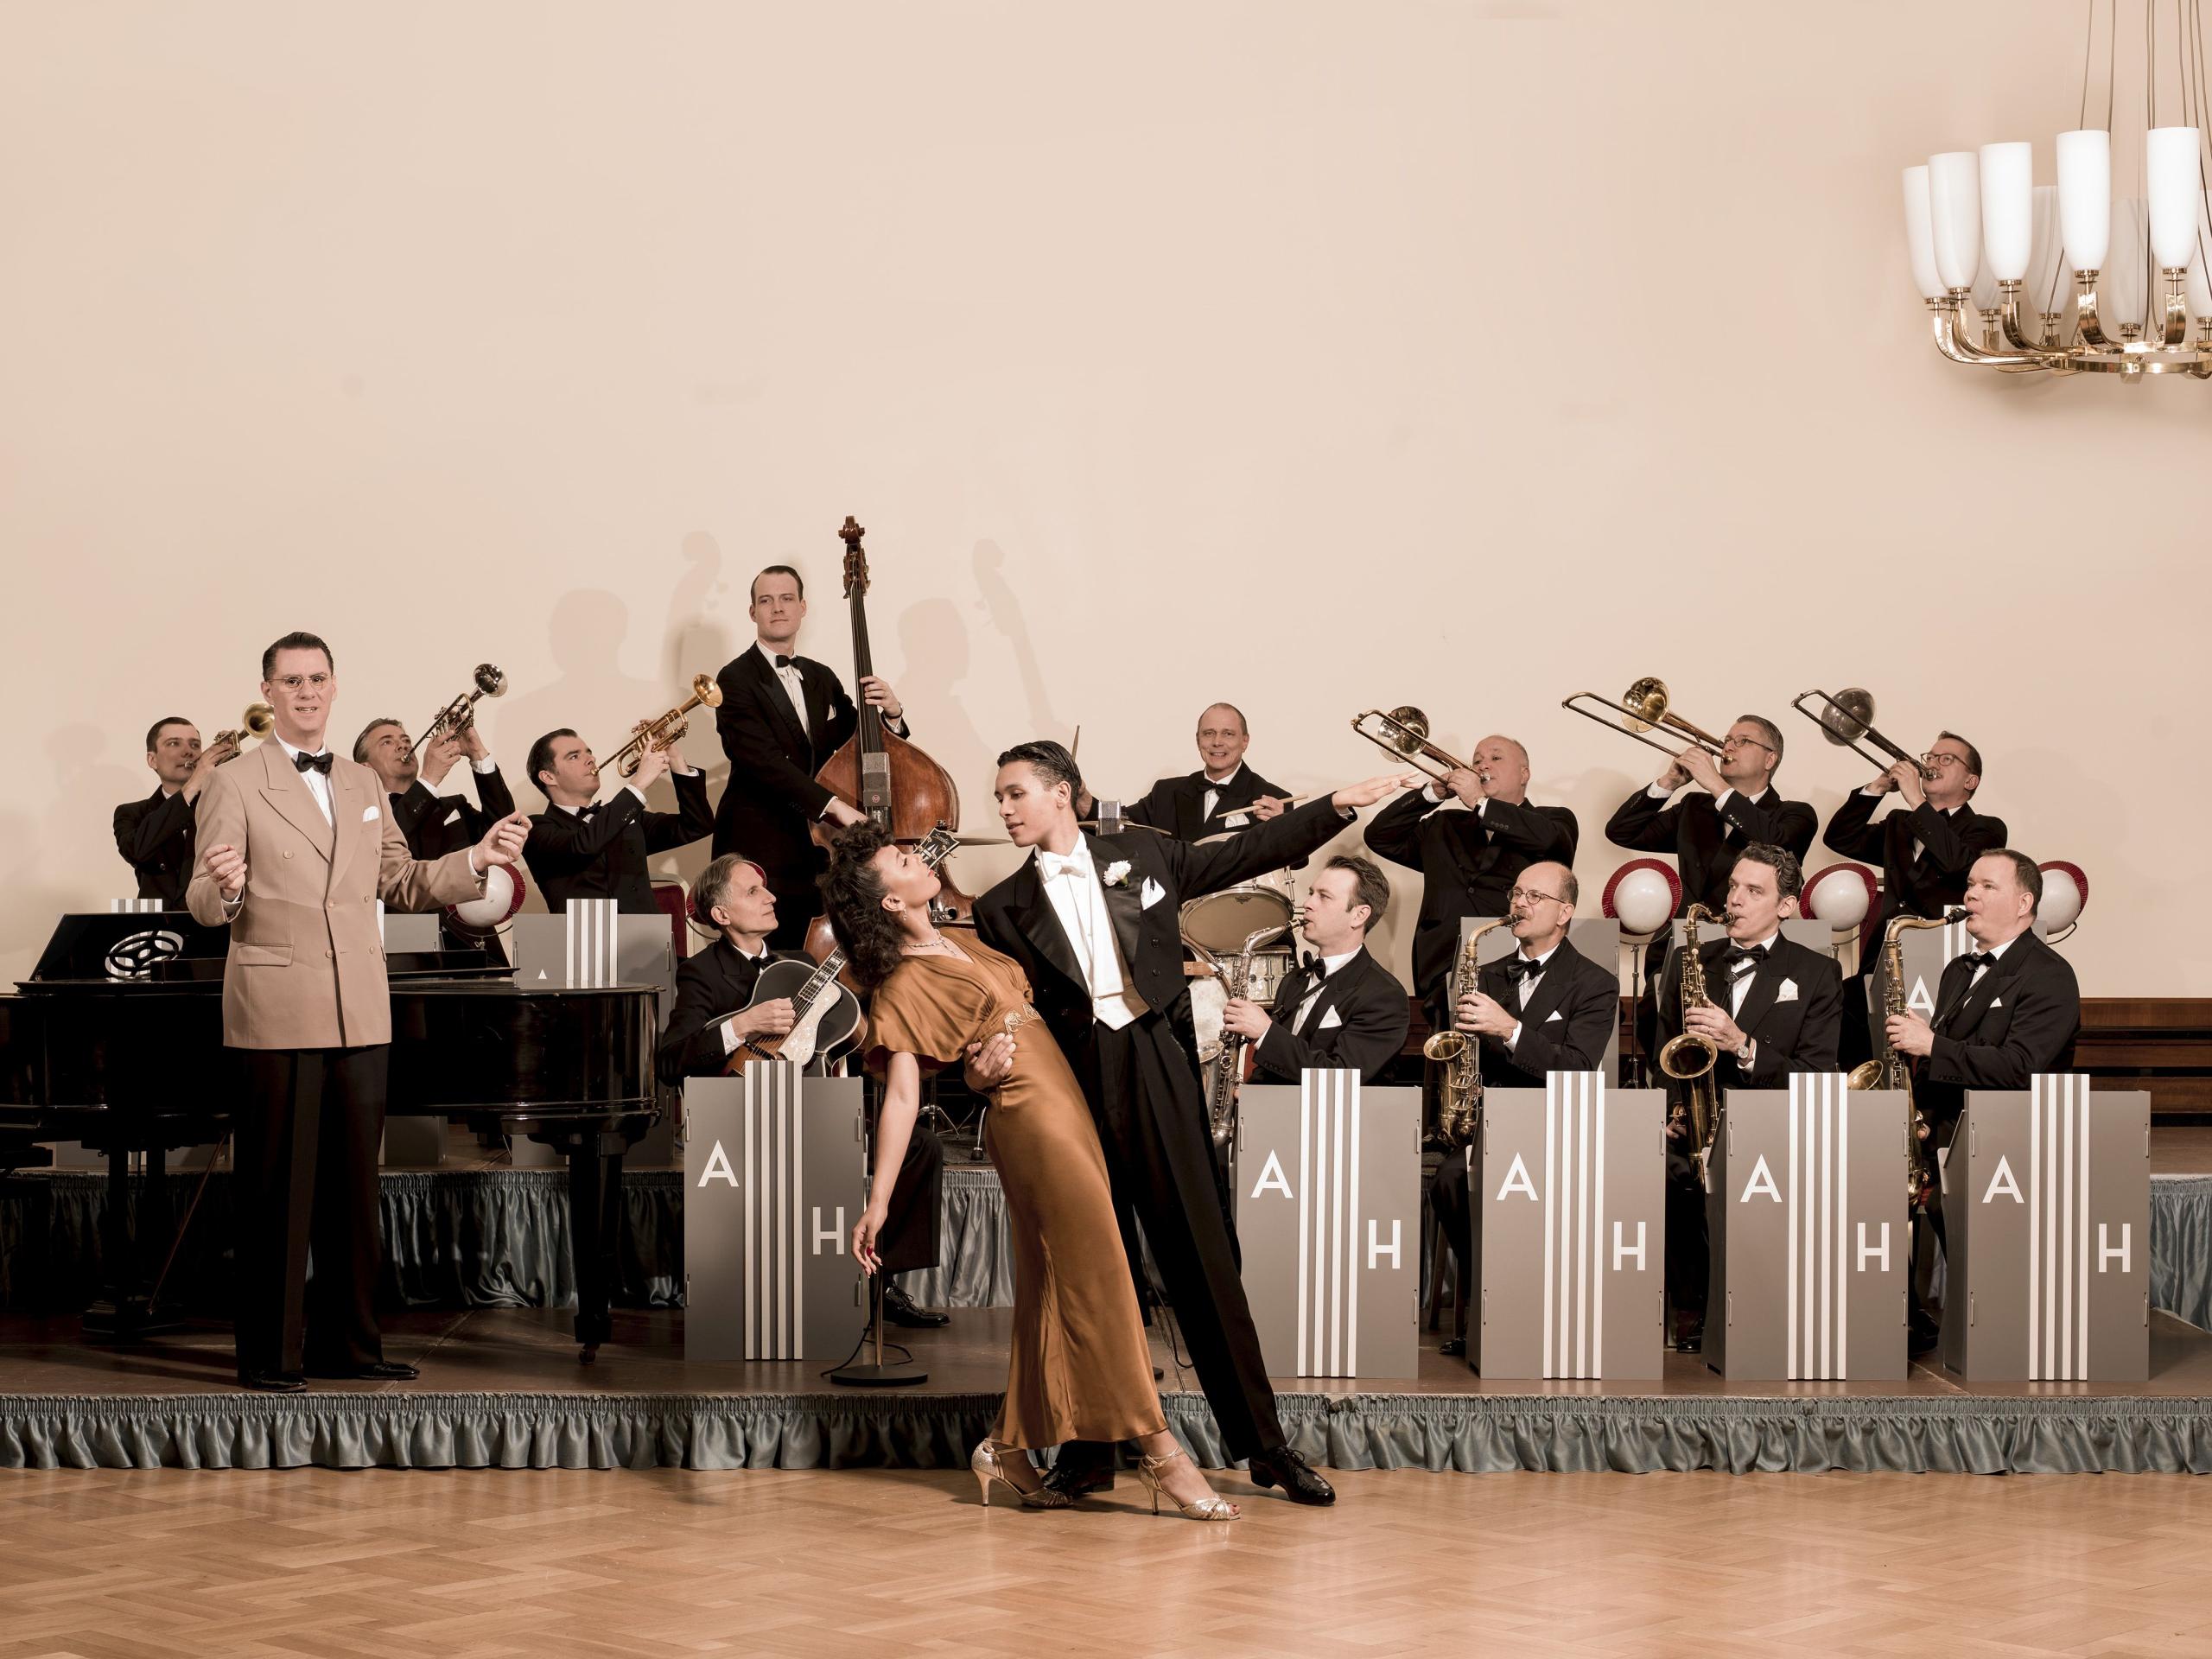 A dancing couple stands in an elegant pose in front of a big band.